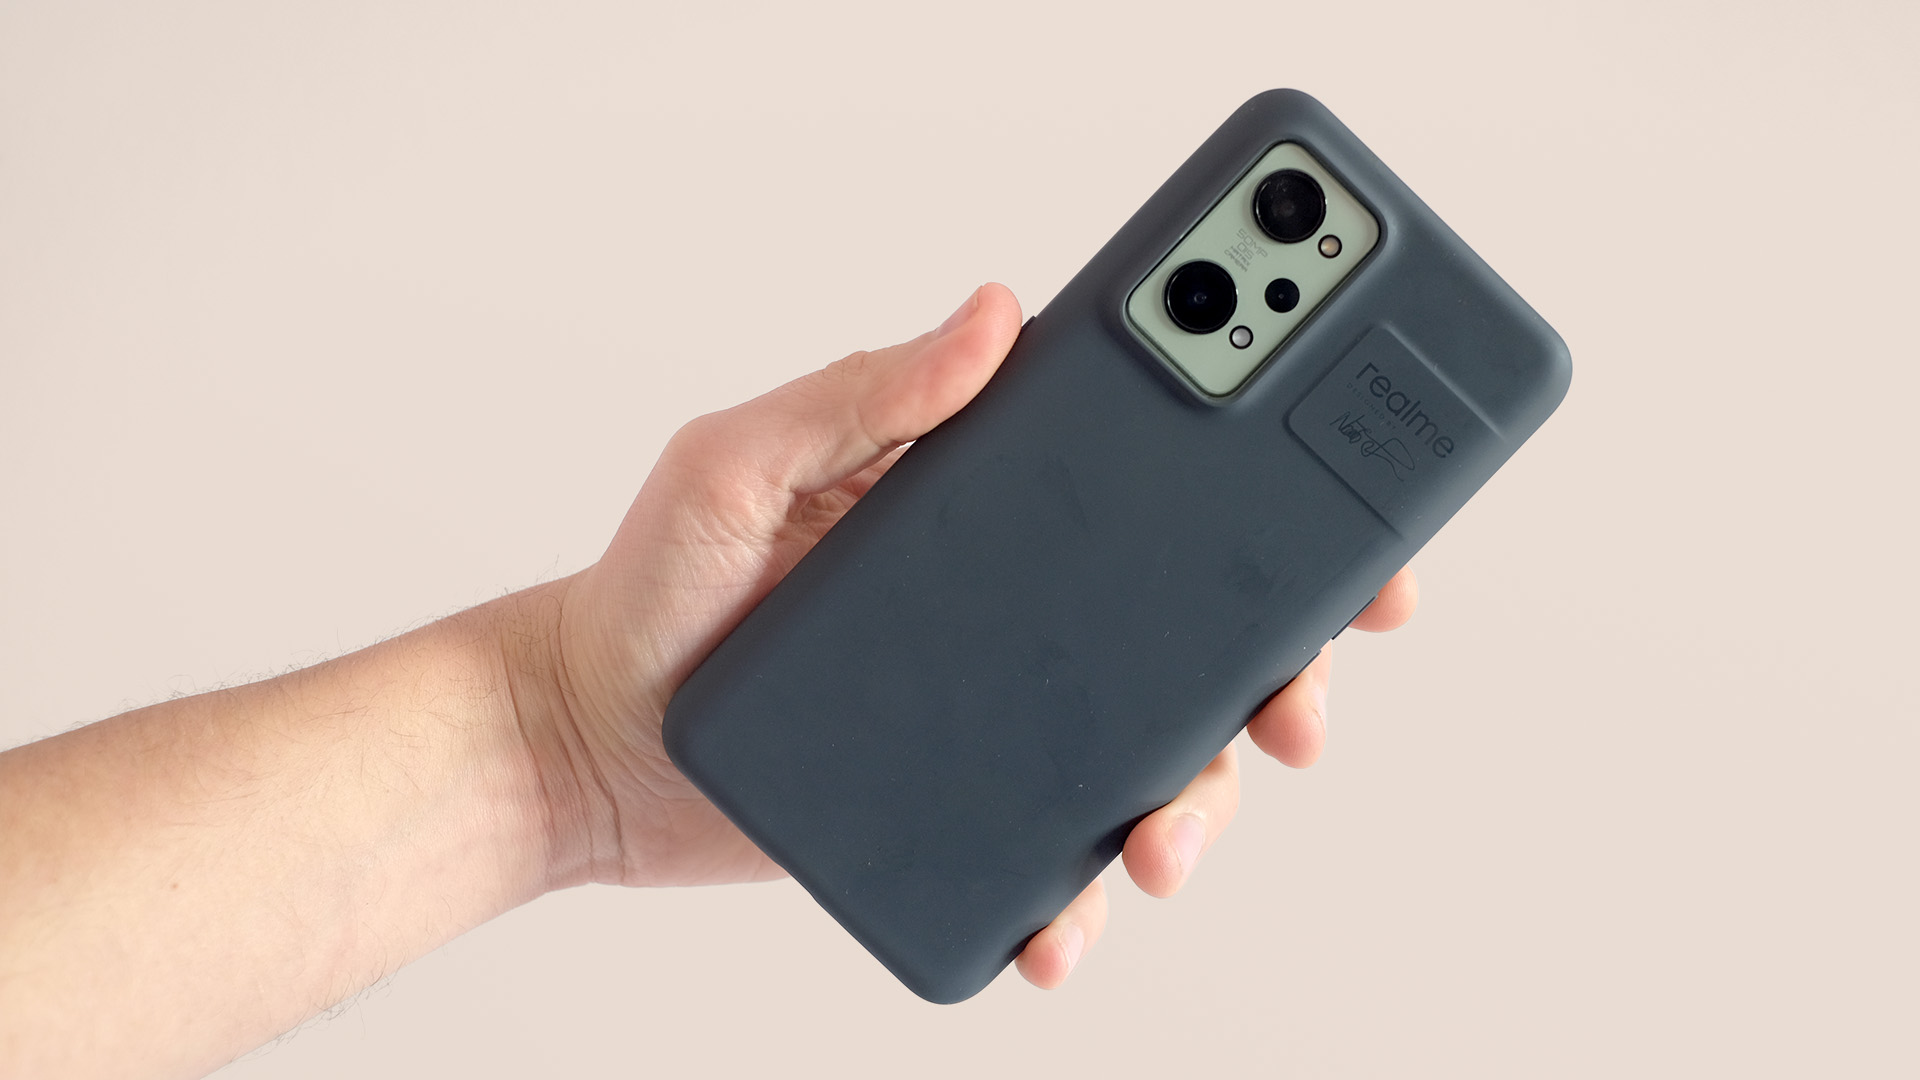 A Realme GT 2 in a case, held in someone's hand